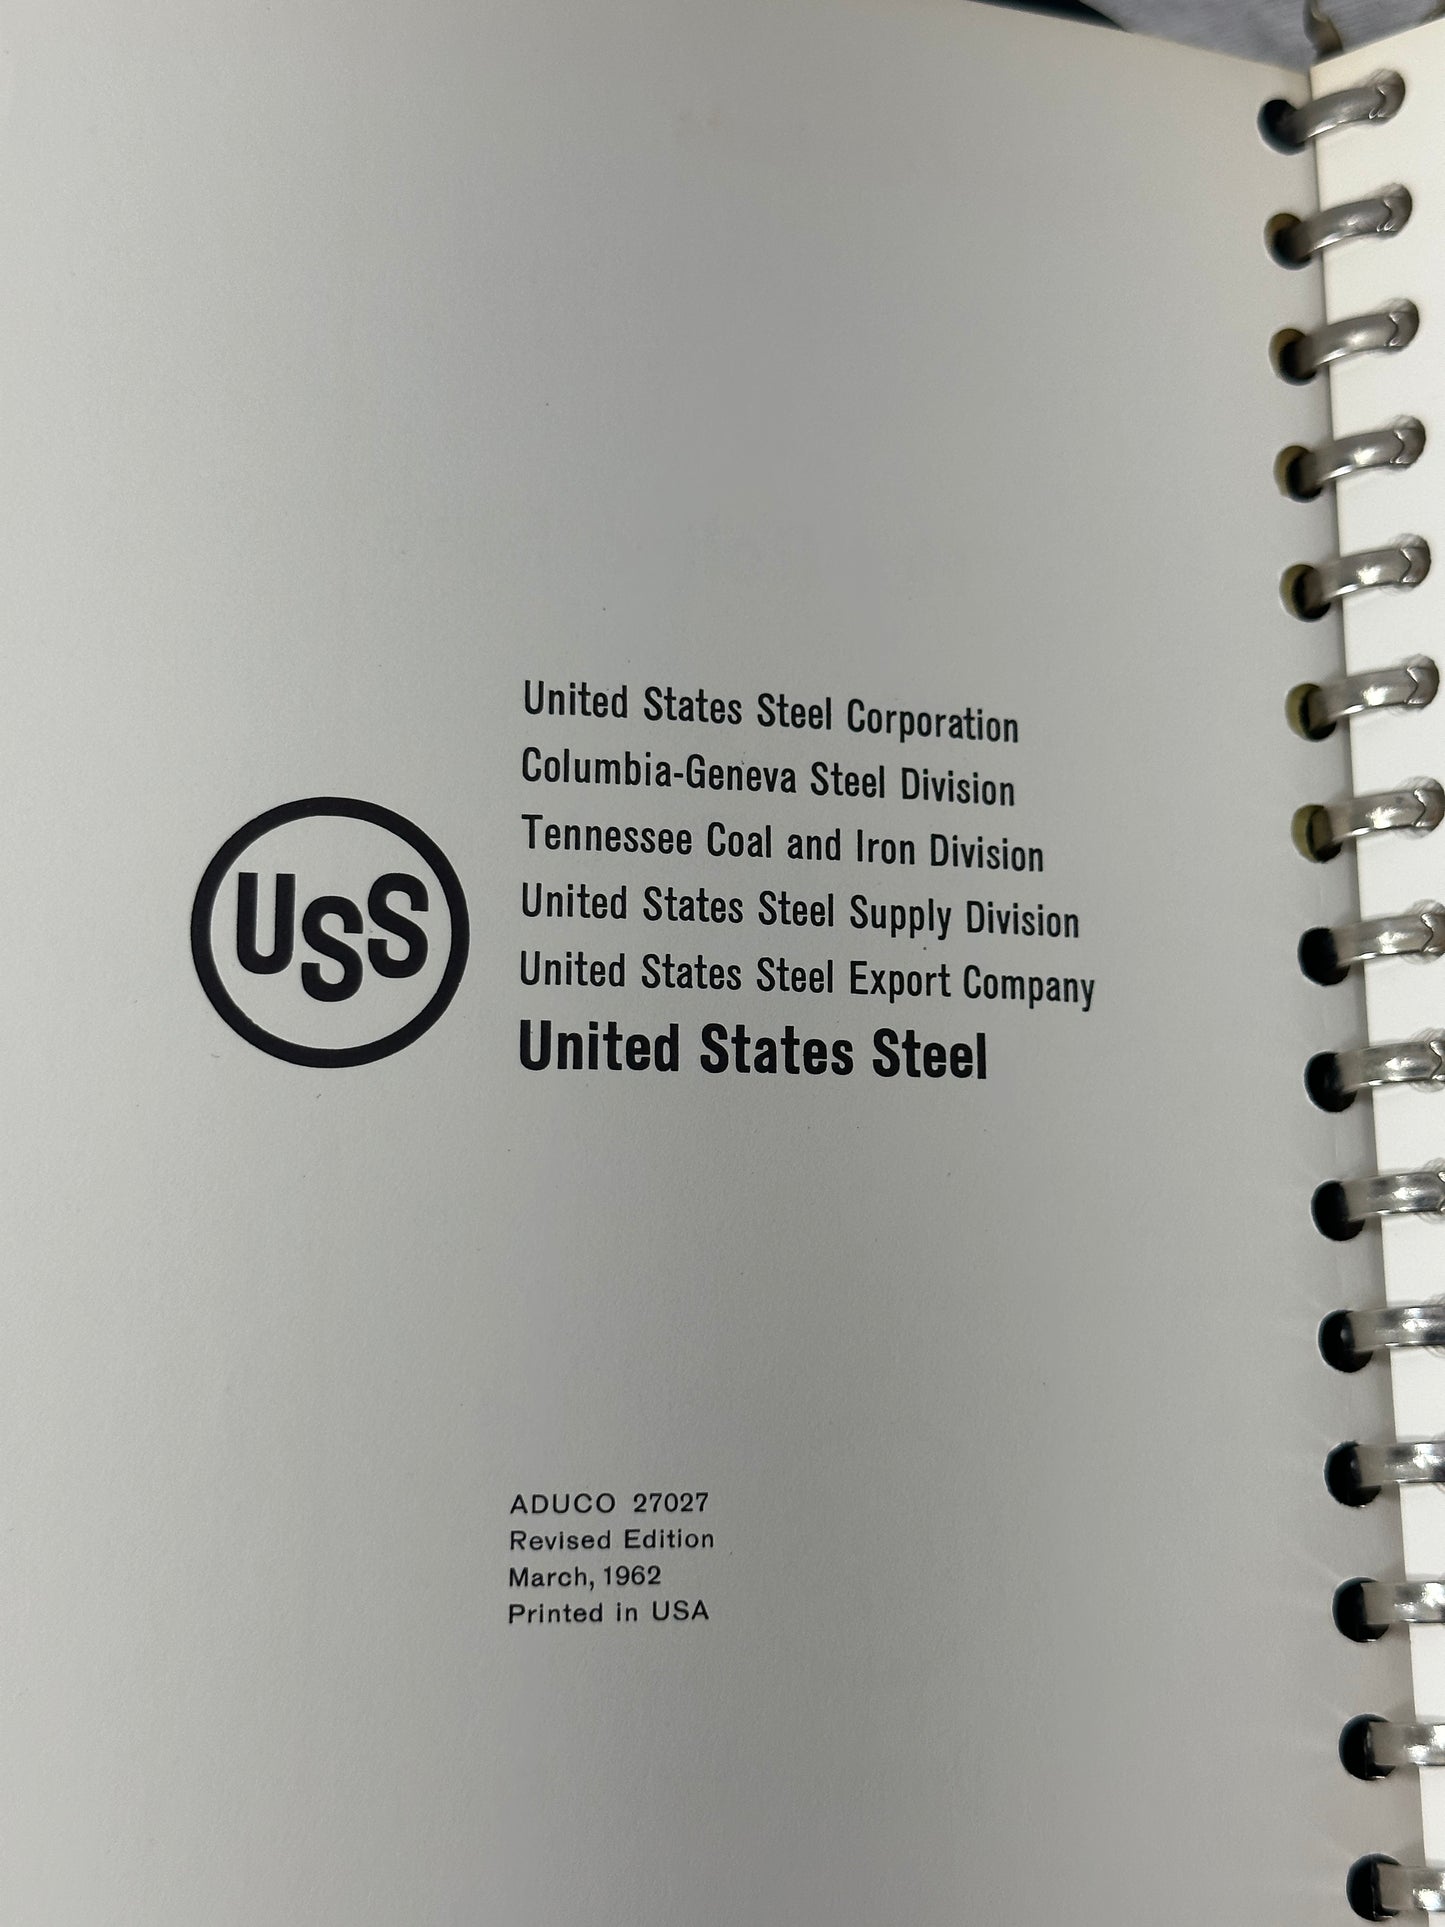 Hot Rolled Steel Shapes and Plates by United States Steel  [1962]